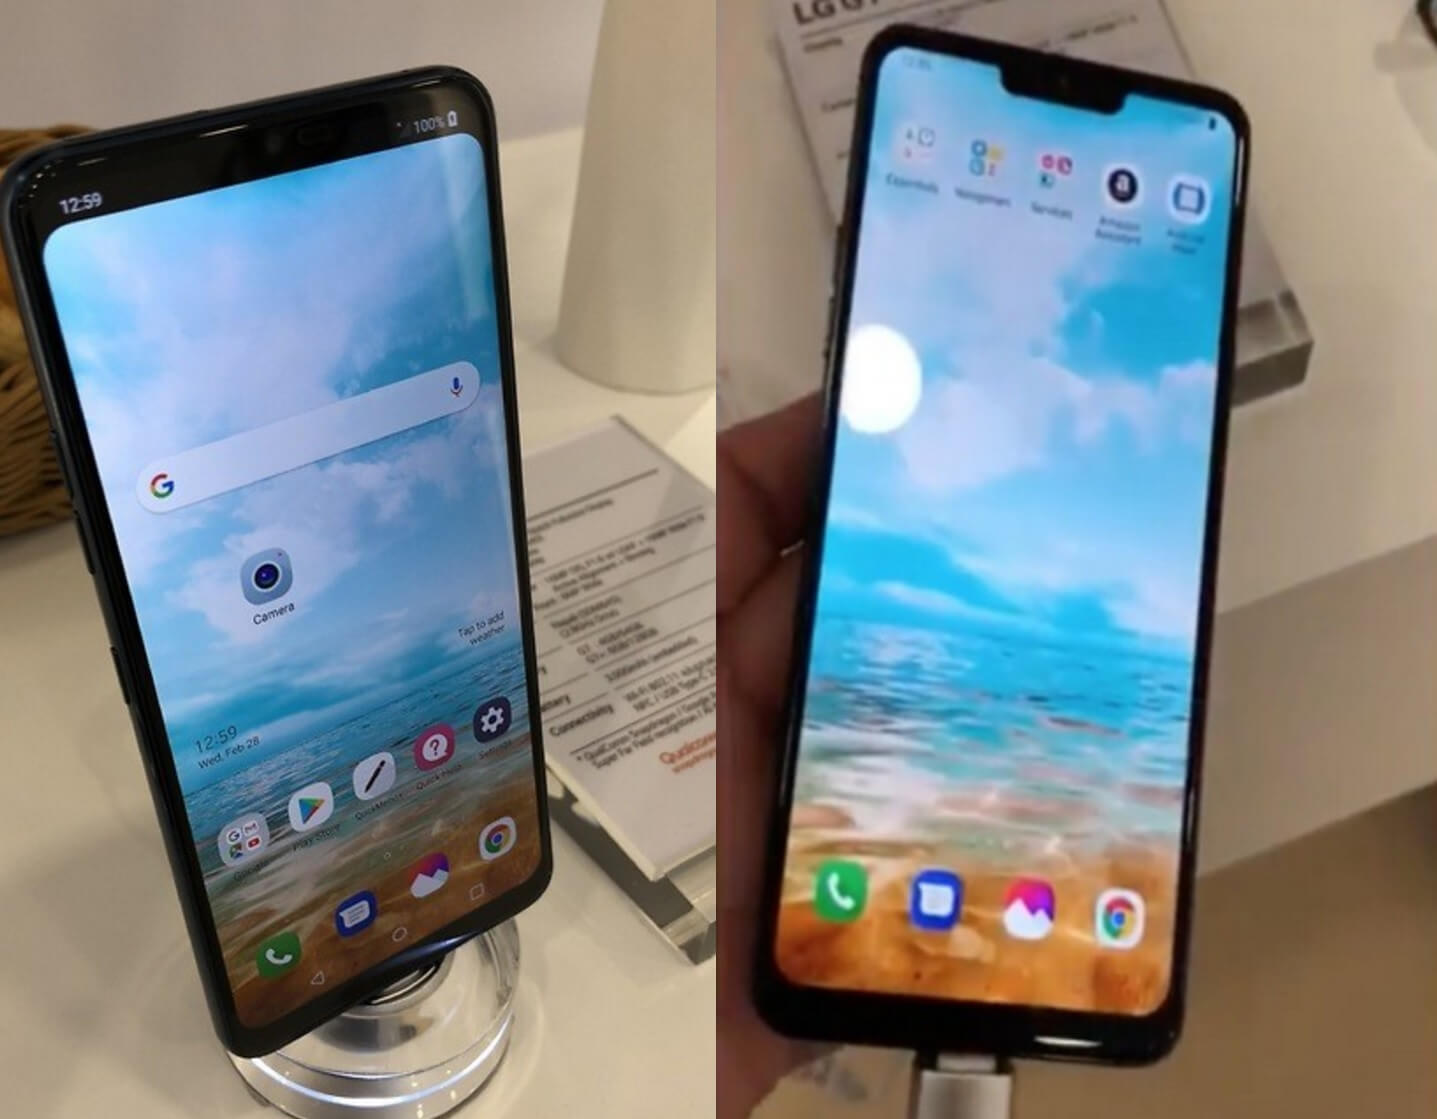 Supposedly canceled LG G7 makes an appearance using iPhone X-style notch